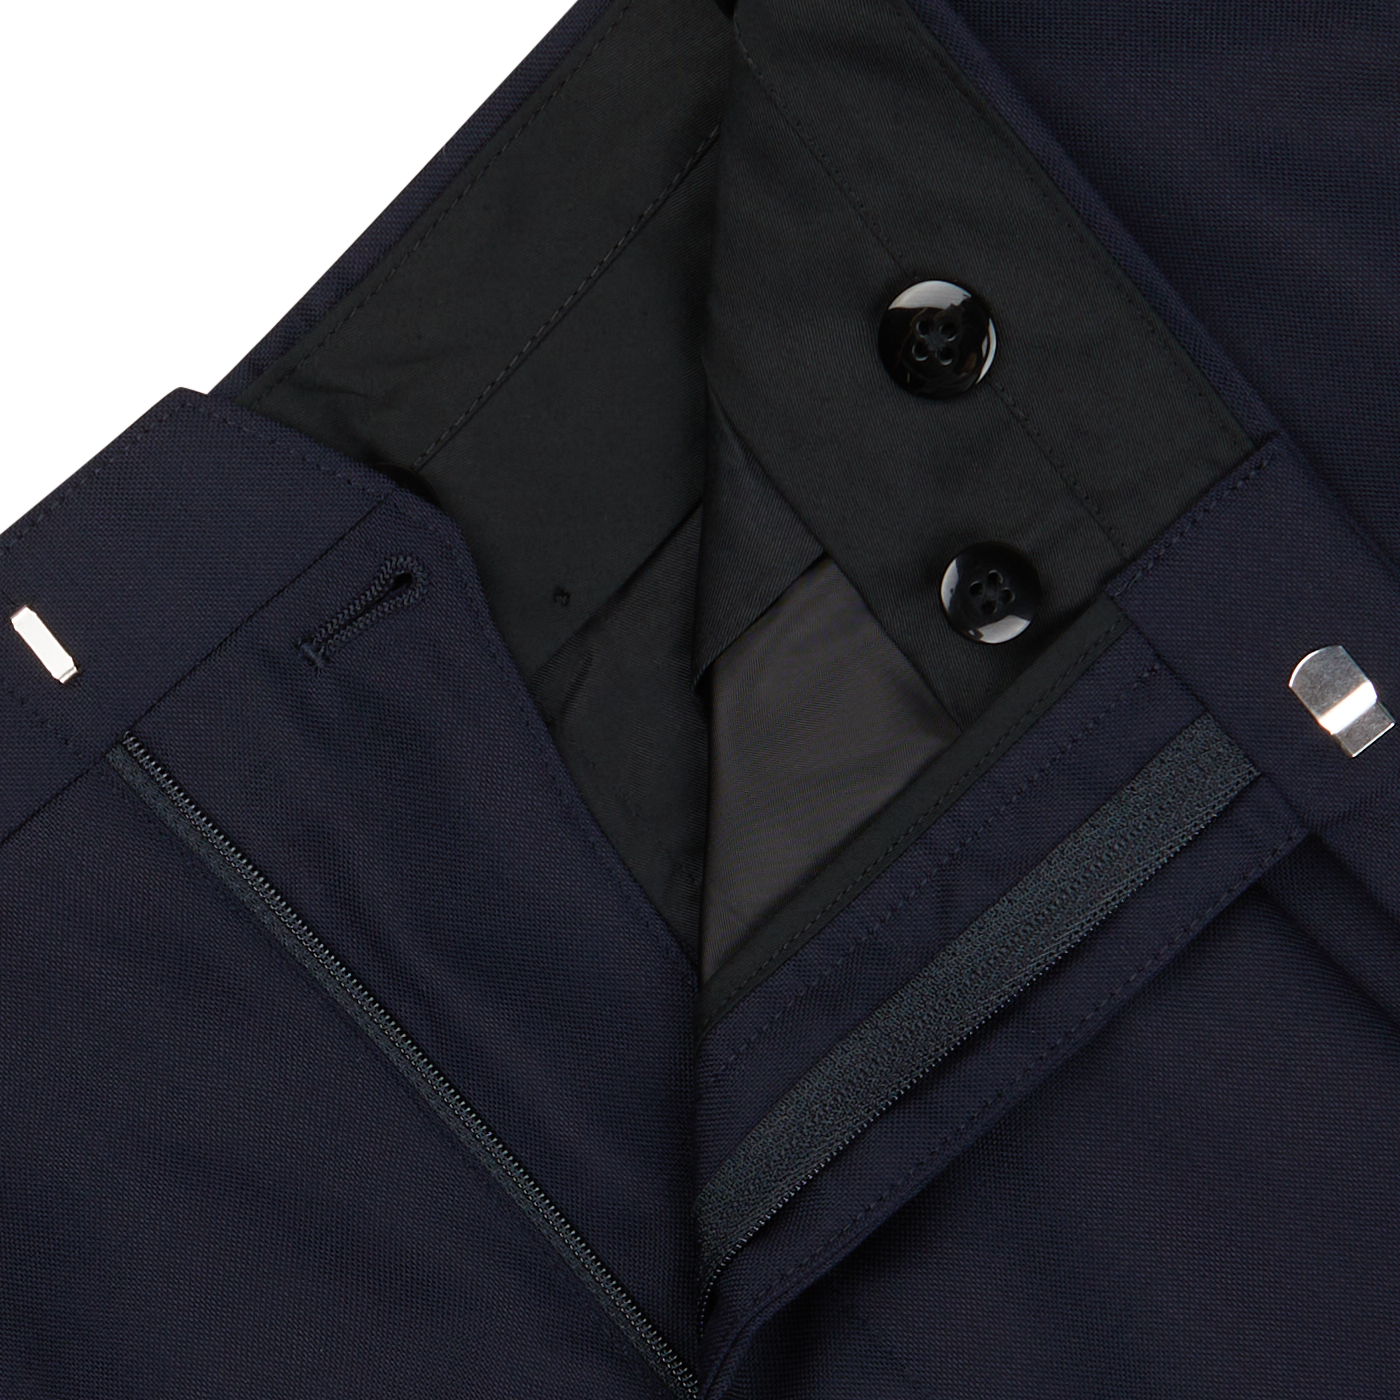 Close-up of a Navy Super 100's Wool Pleated Suit Trousers from Baltzar Sartorial with black buttons, a zipper, and visible inner lining.